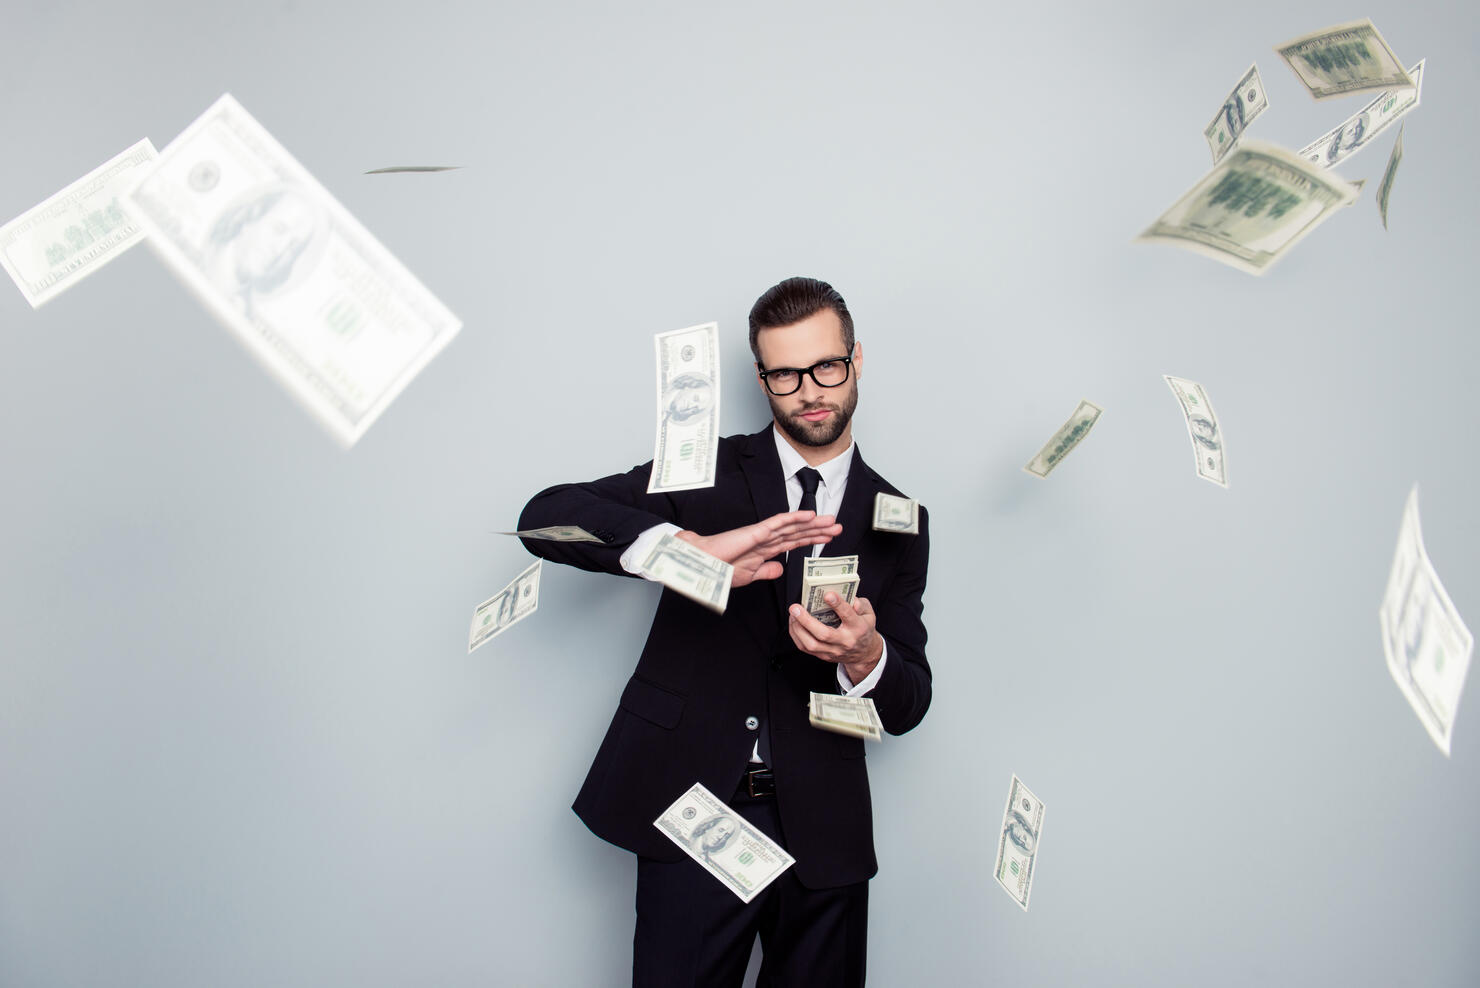 Spectacles jackpot entrepreneur economist banker chic posh manager jacket concept. Handsome confident cunning clever wealthy rich luxury guy holding wasting stack of money isolated on gray background